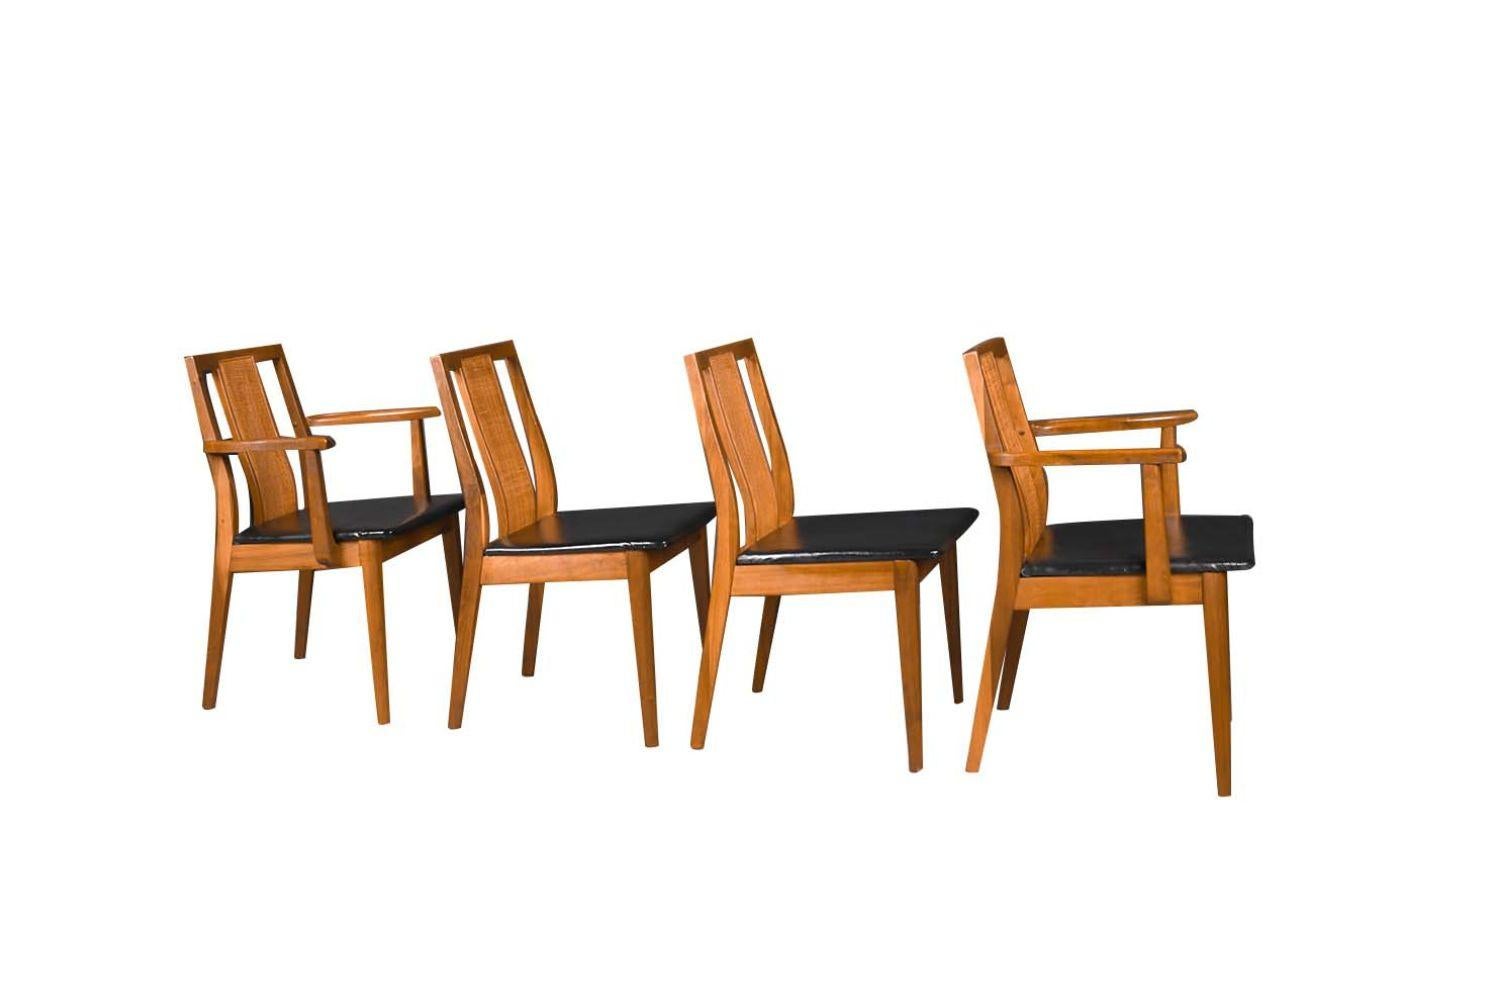 Mid-20th Century Four Midcentury Chairs in the Style of Edward Wormley